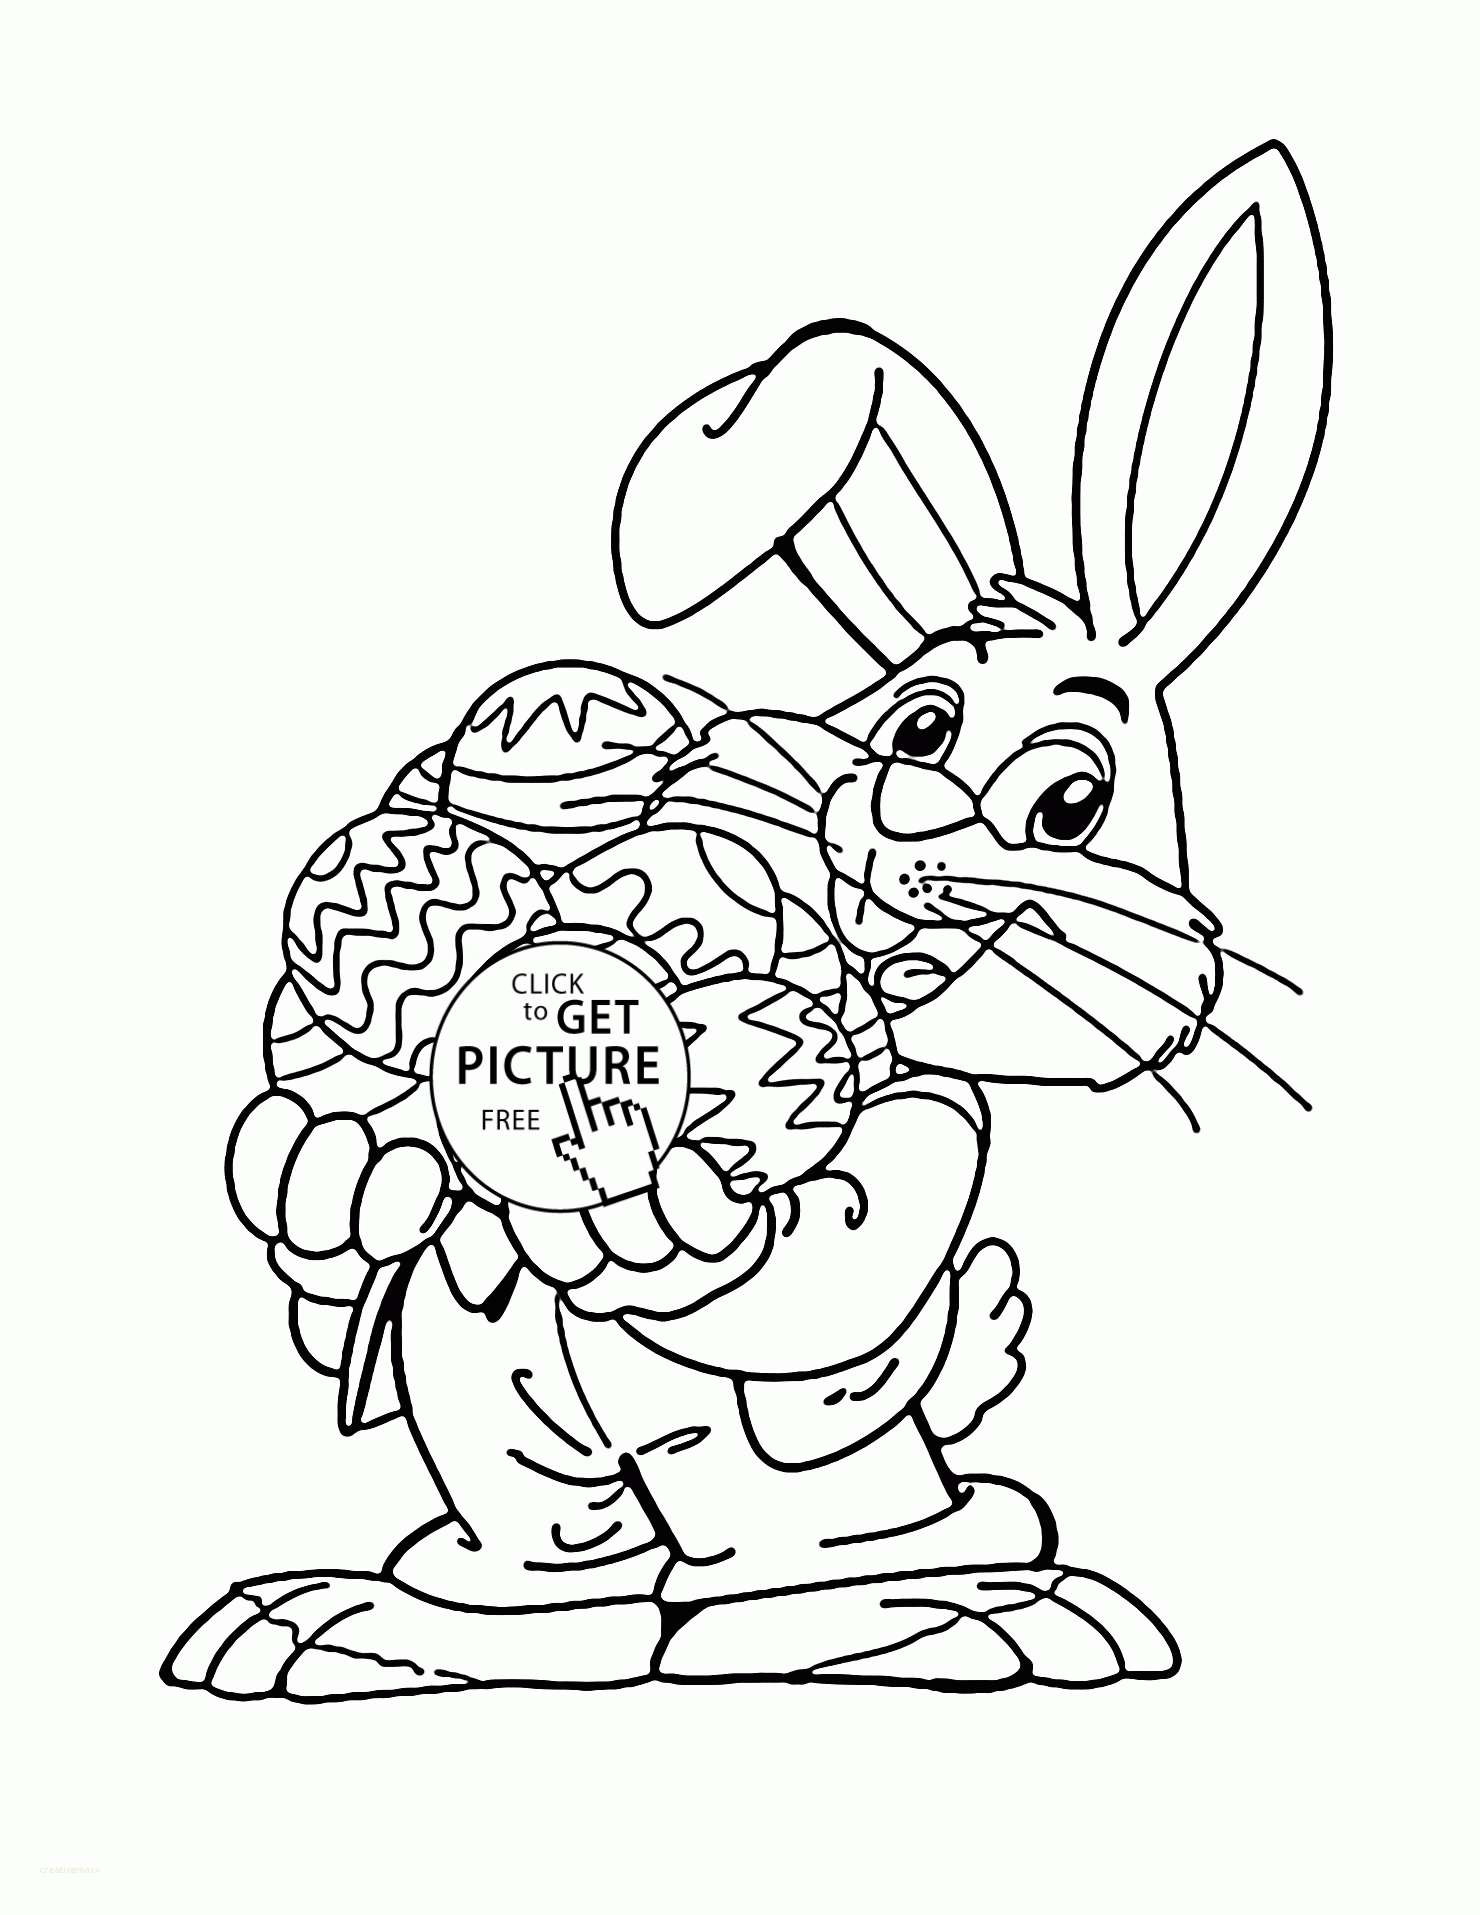 Easter Bunny Free Printable Coloring Pages
 Awesome 15 Cute Easter Bunny Coloring Pages Printable